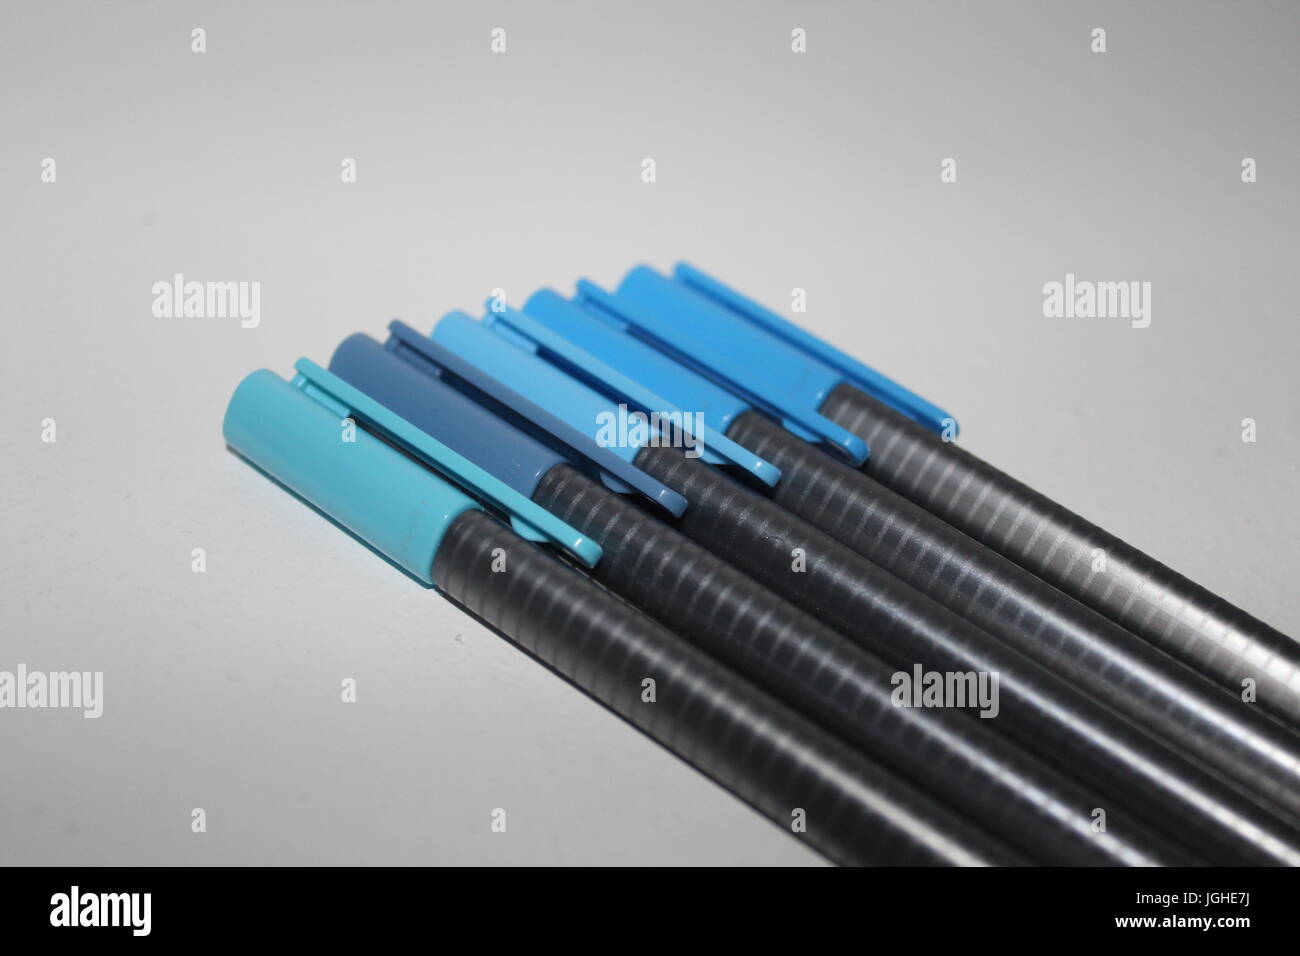 A row of pens in different shades of blue Stock Photo